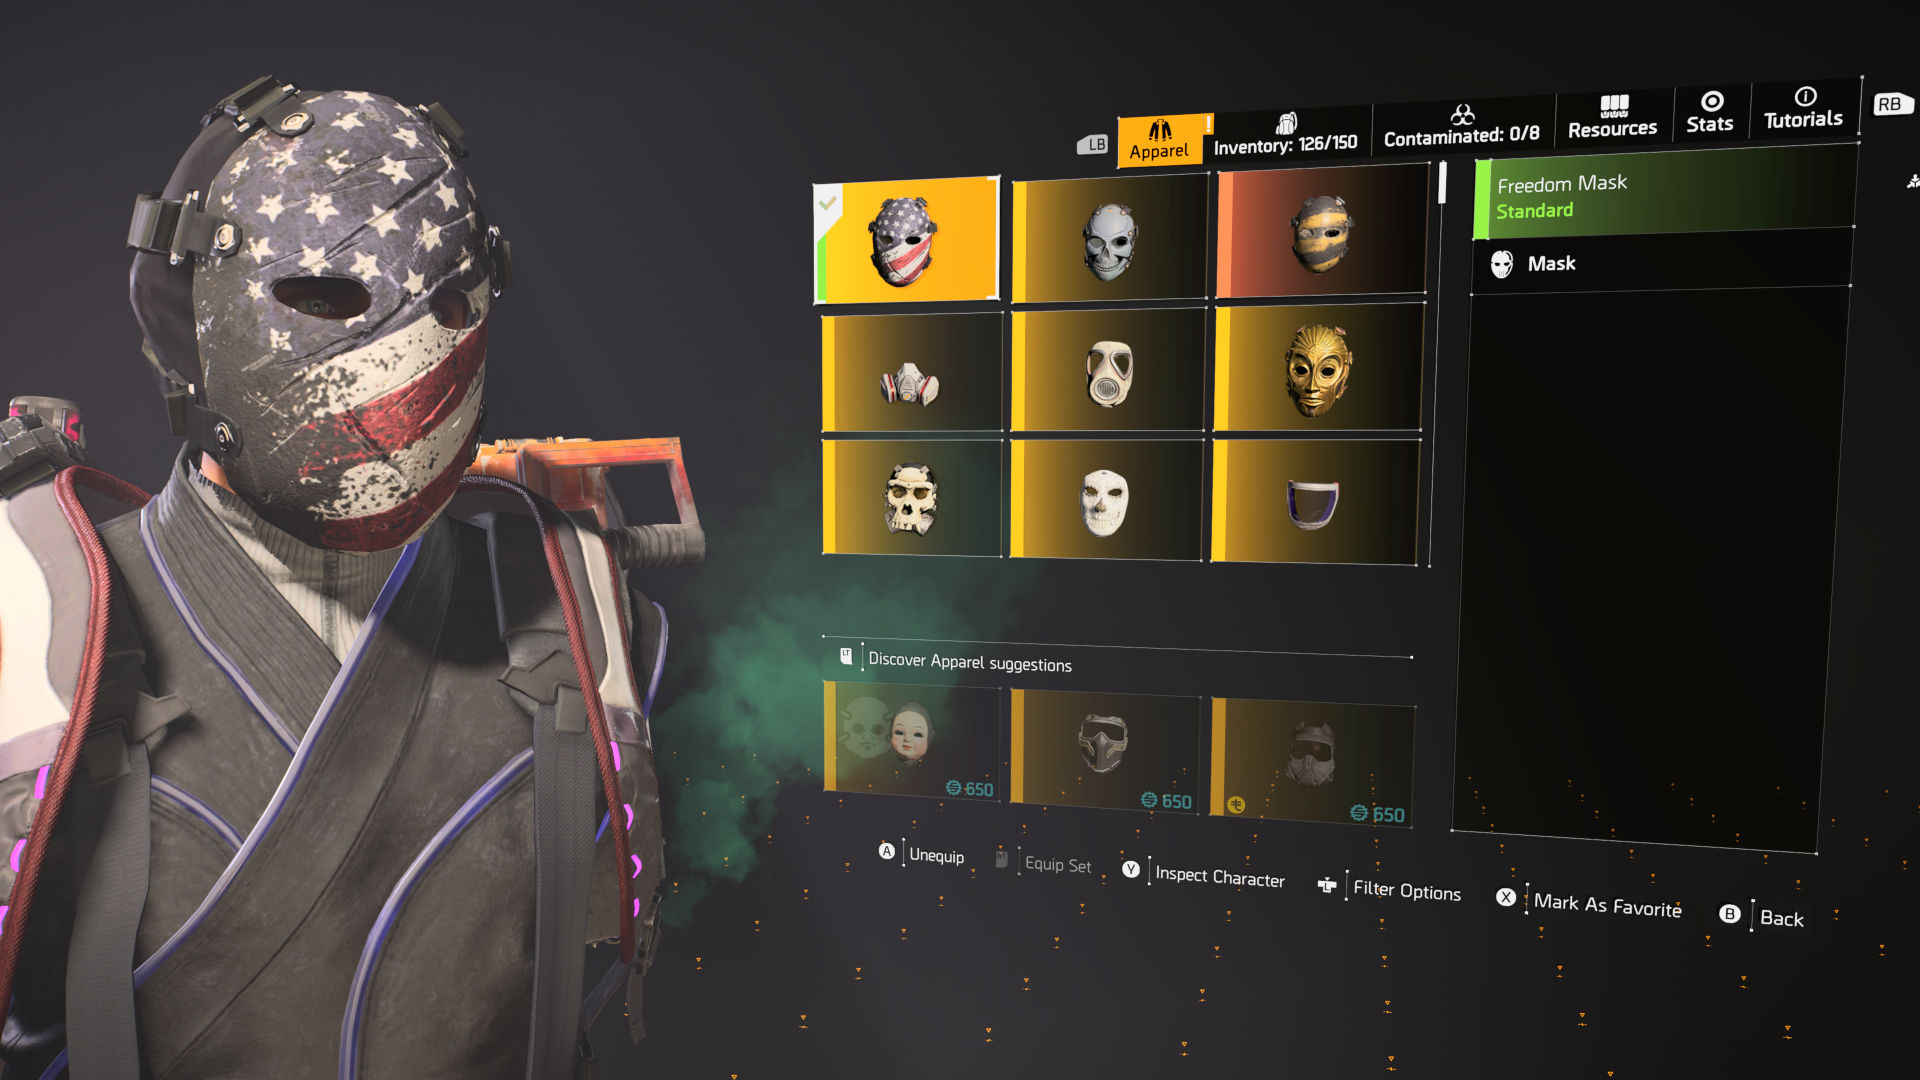 The Freedom Mask in The Division 2